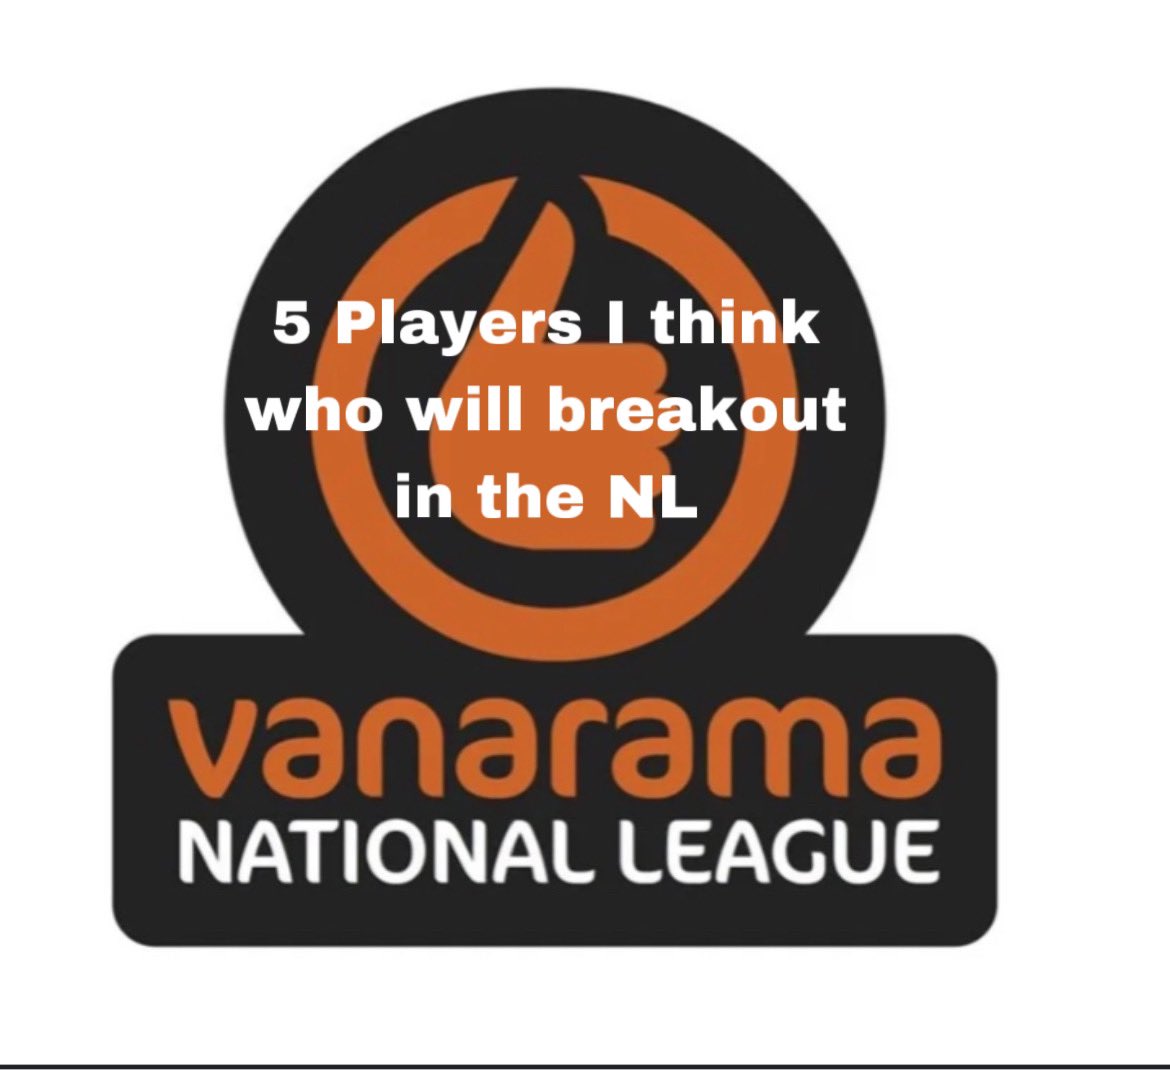 5 players I think will breakout In National league 24/25 season🧵 

Likes and RT’s are greatly appreciated.

#HeedQuarters #Vanarama #NationalLeague